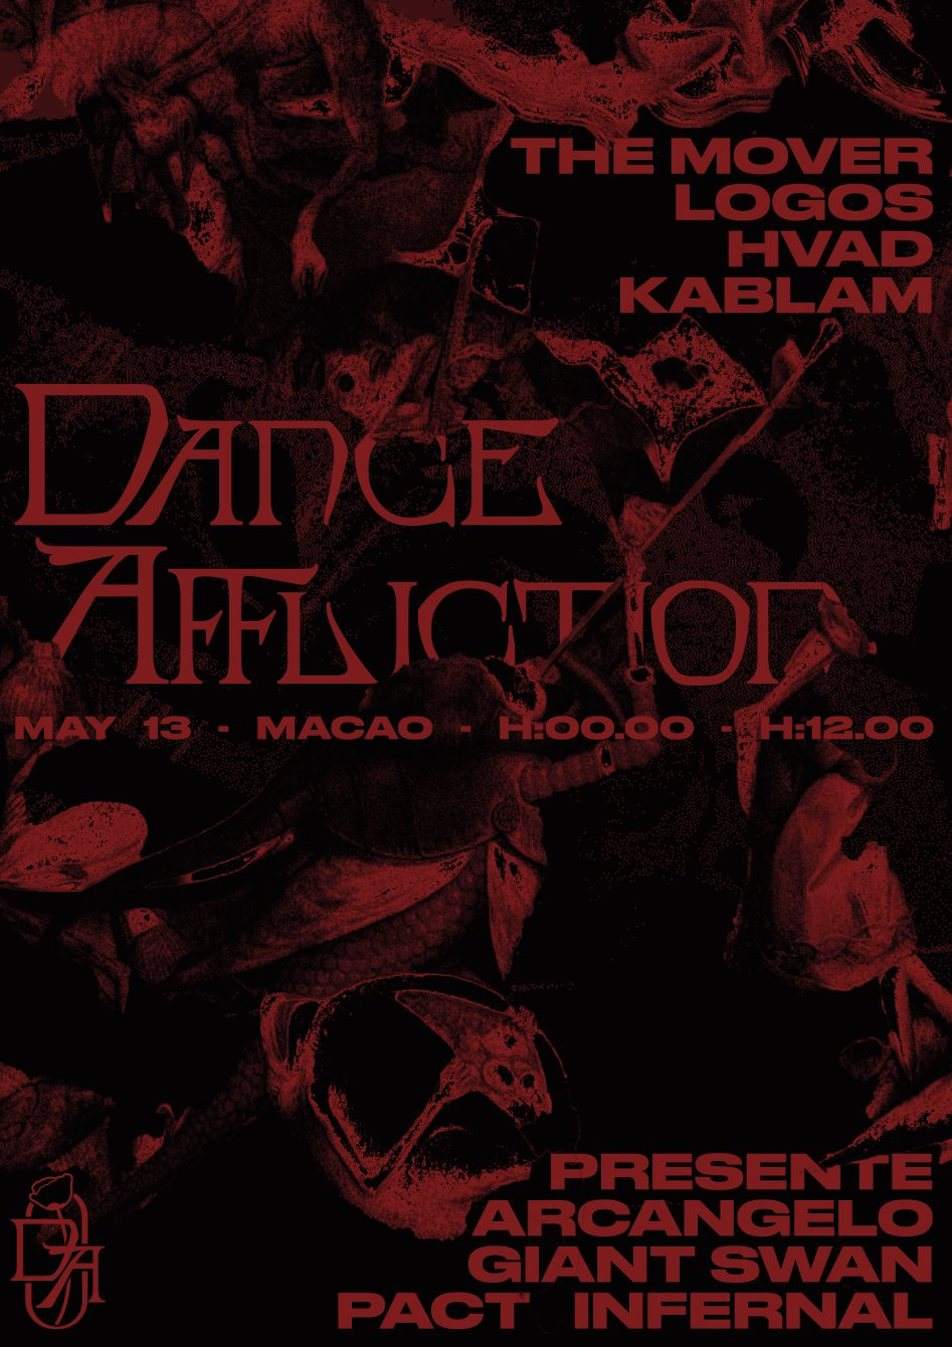 Dance Affliction returns to Milan's Macao with Logos, The Mover image